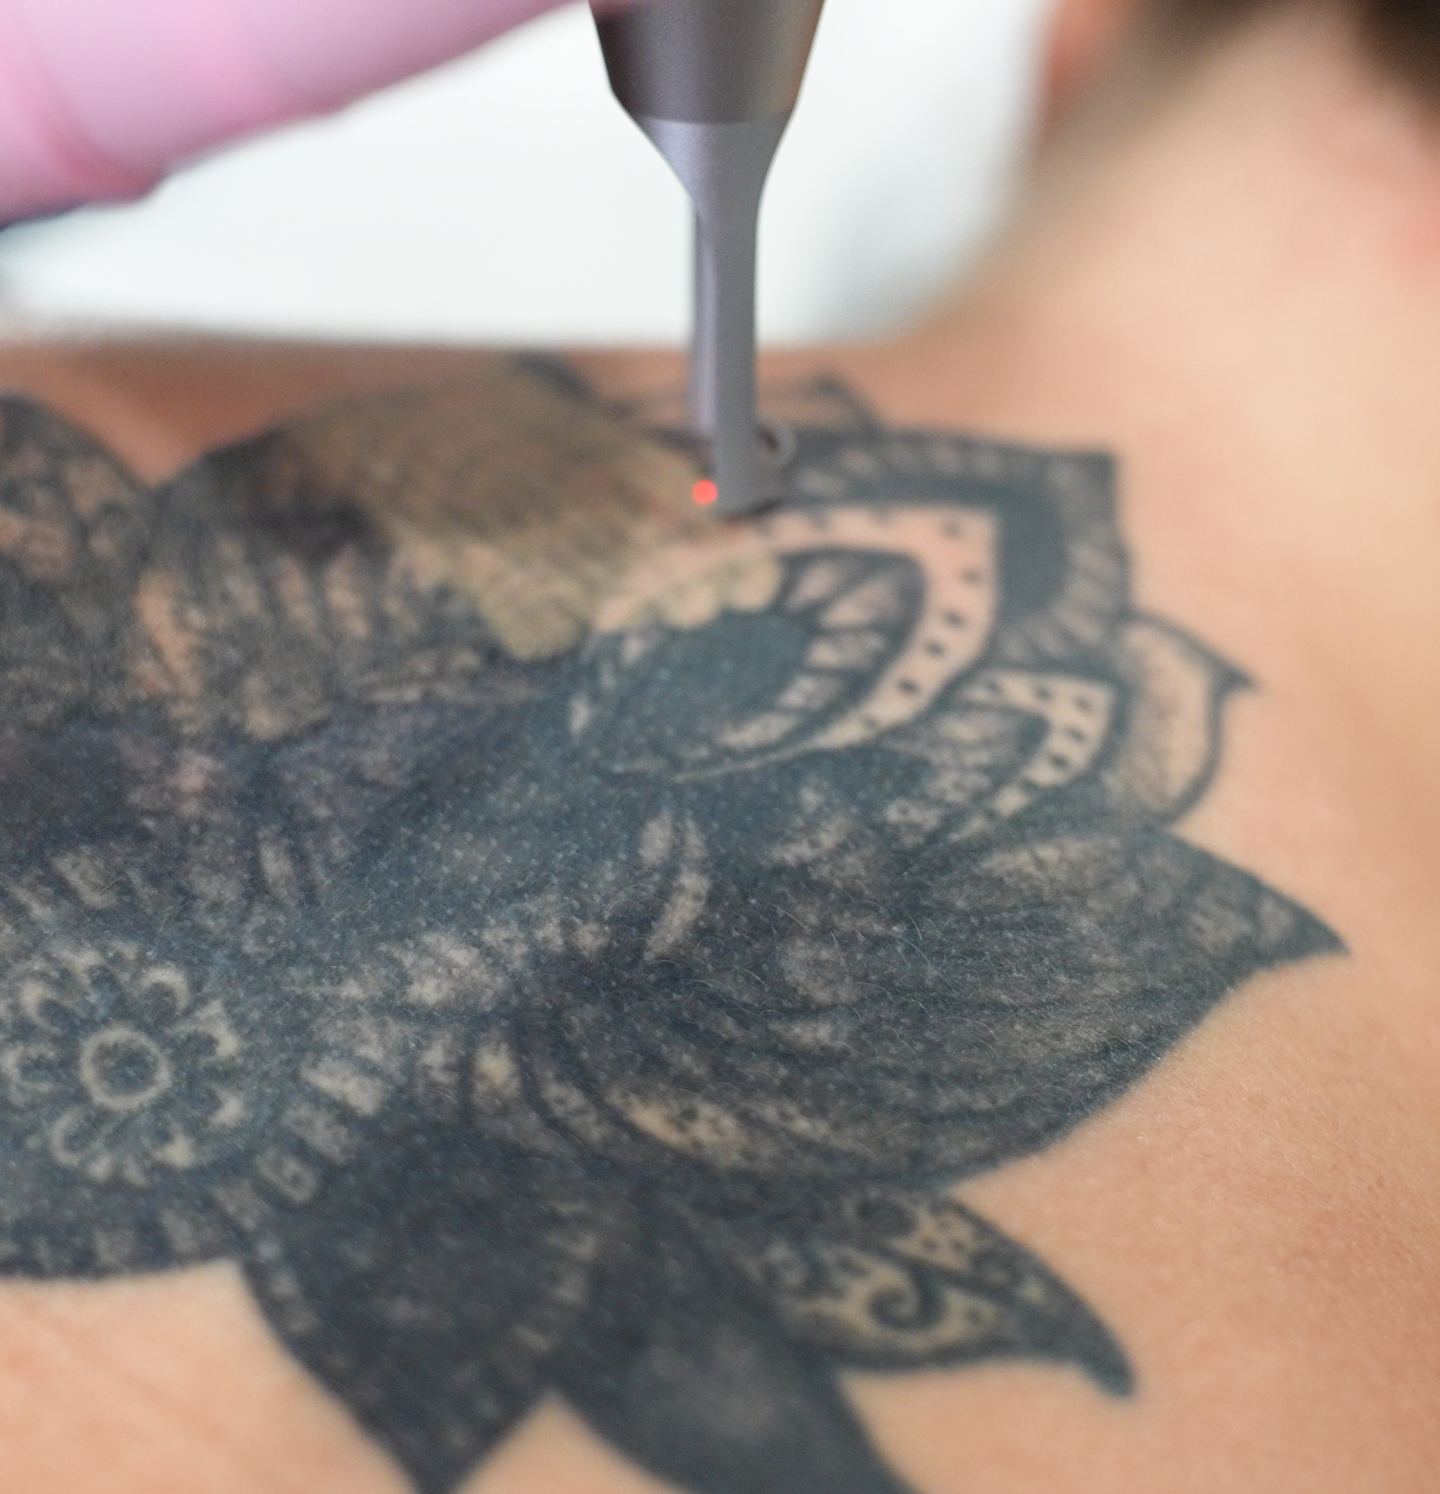 How Many Treatments Does It Take Before The Tattoo Is Removed?